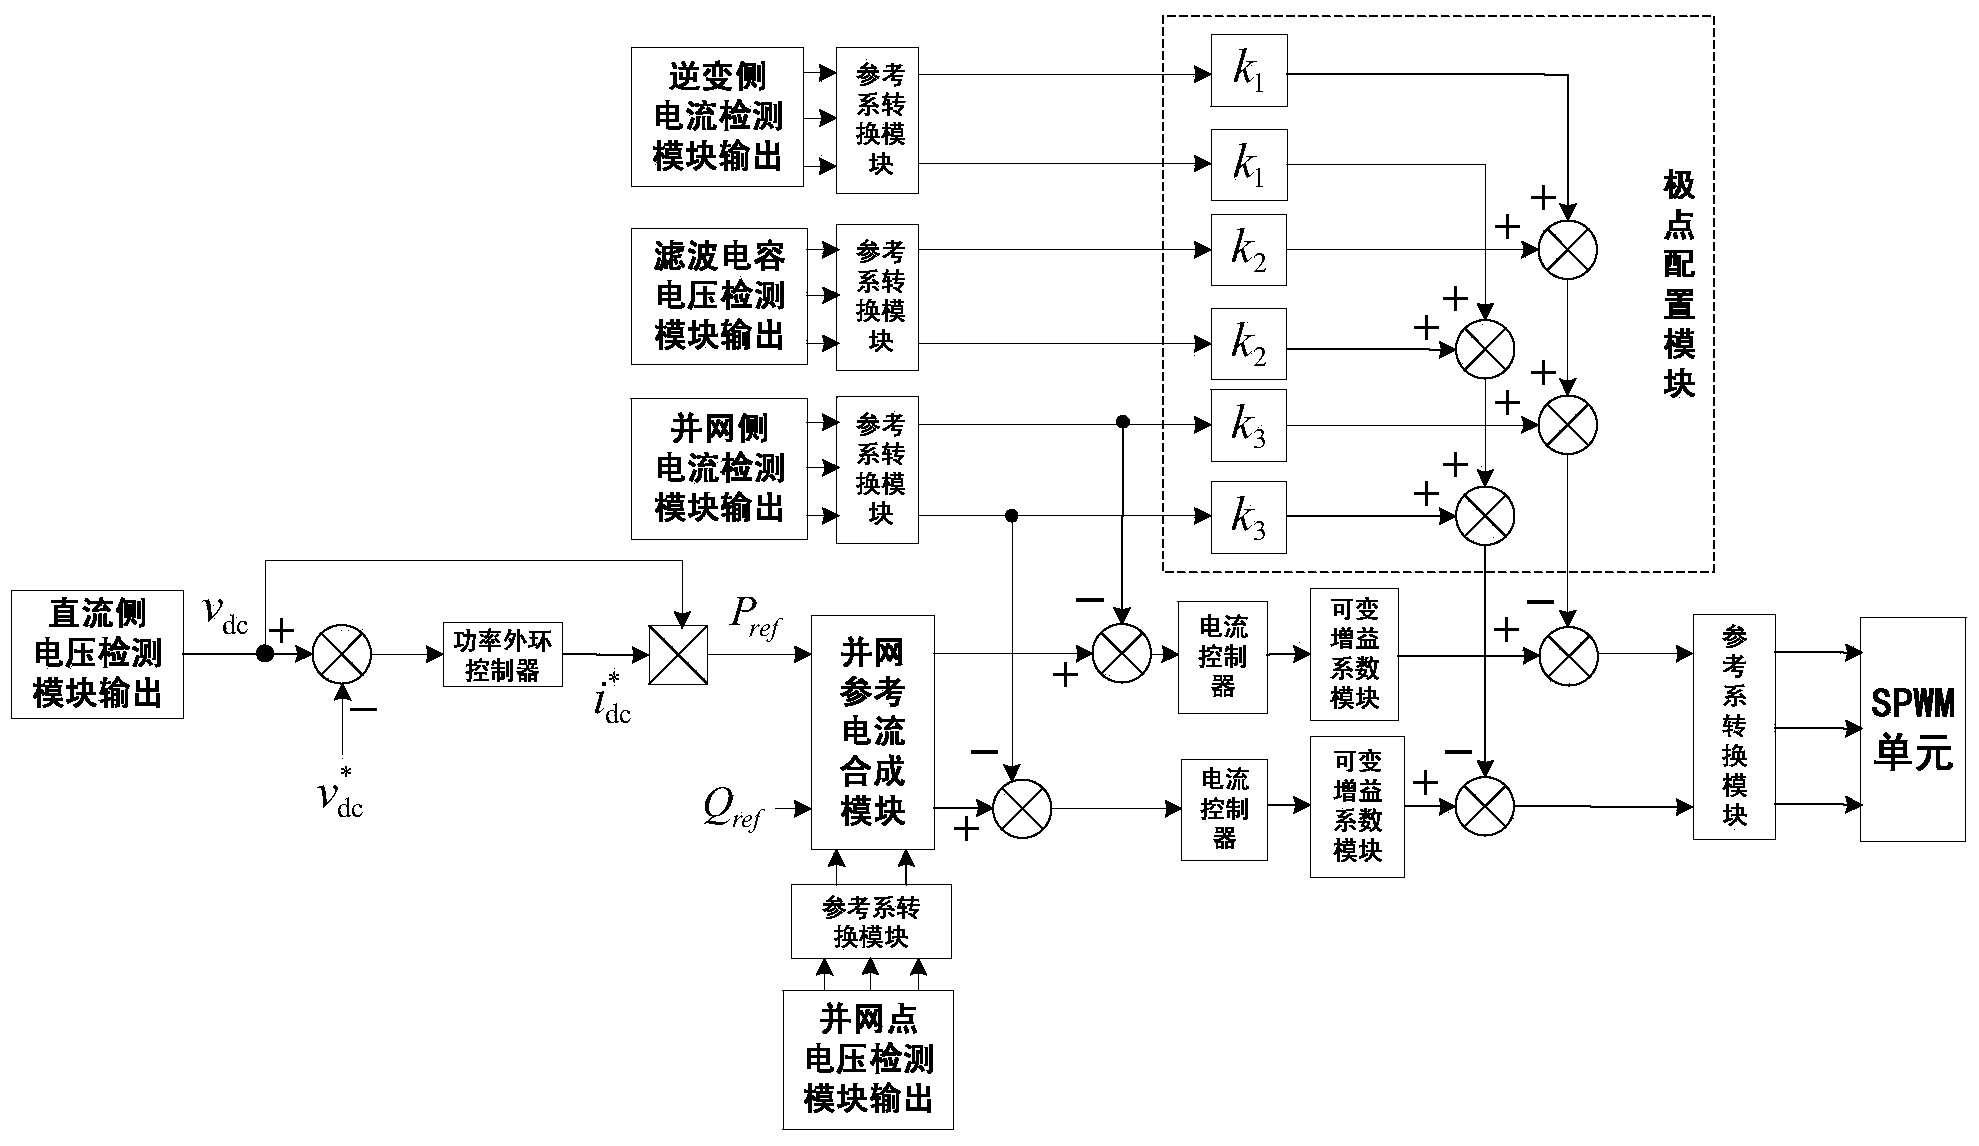 Three-phase LCL type grid-connected inverter control system and method based on pole assignment